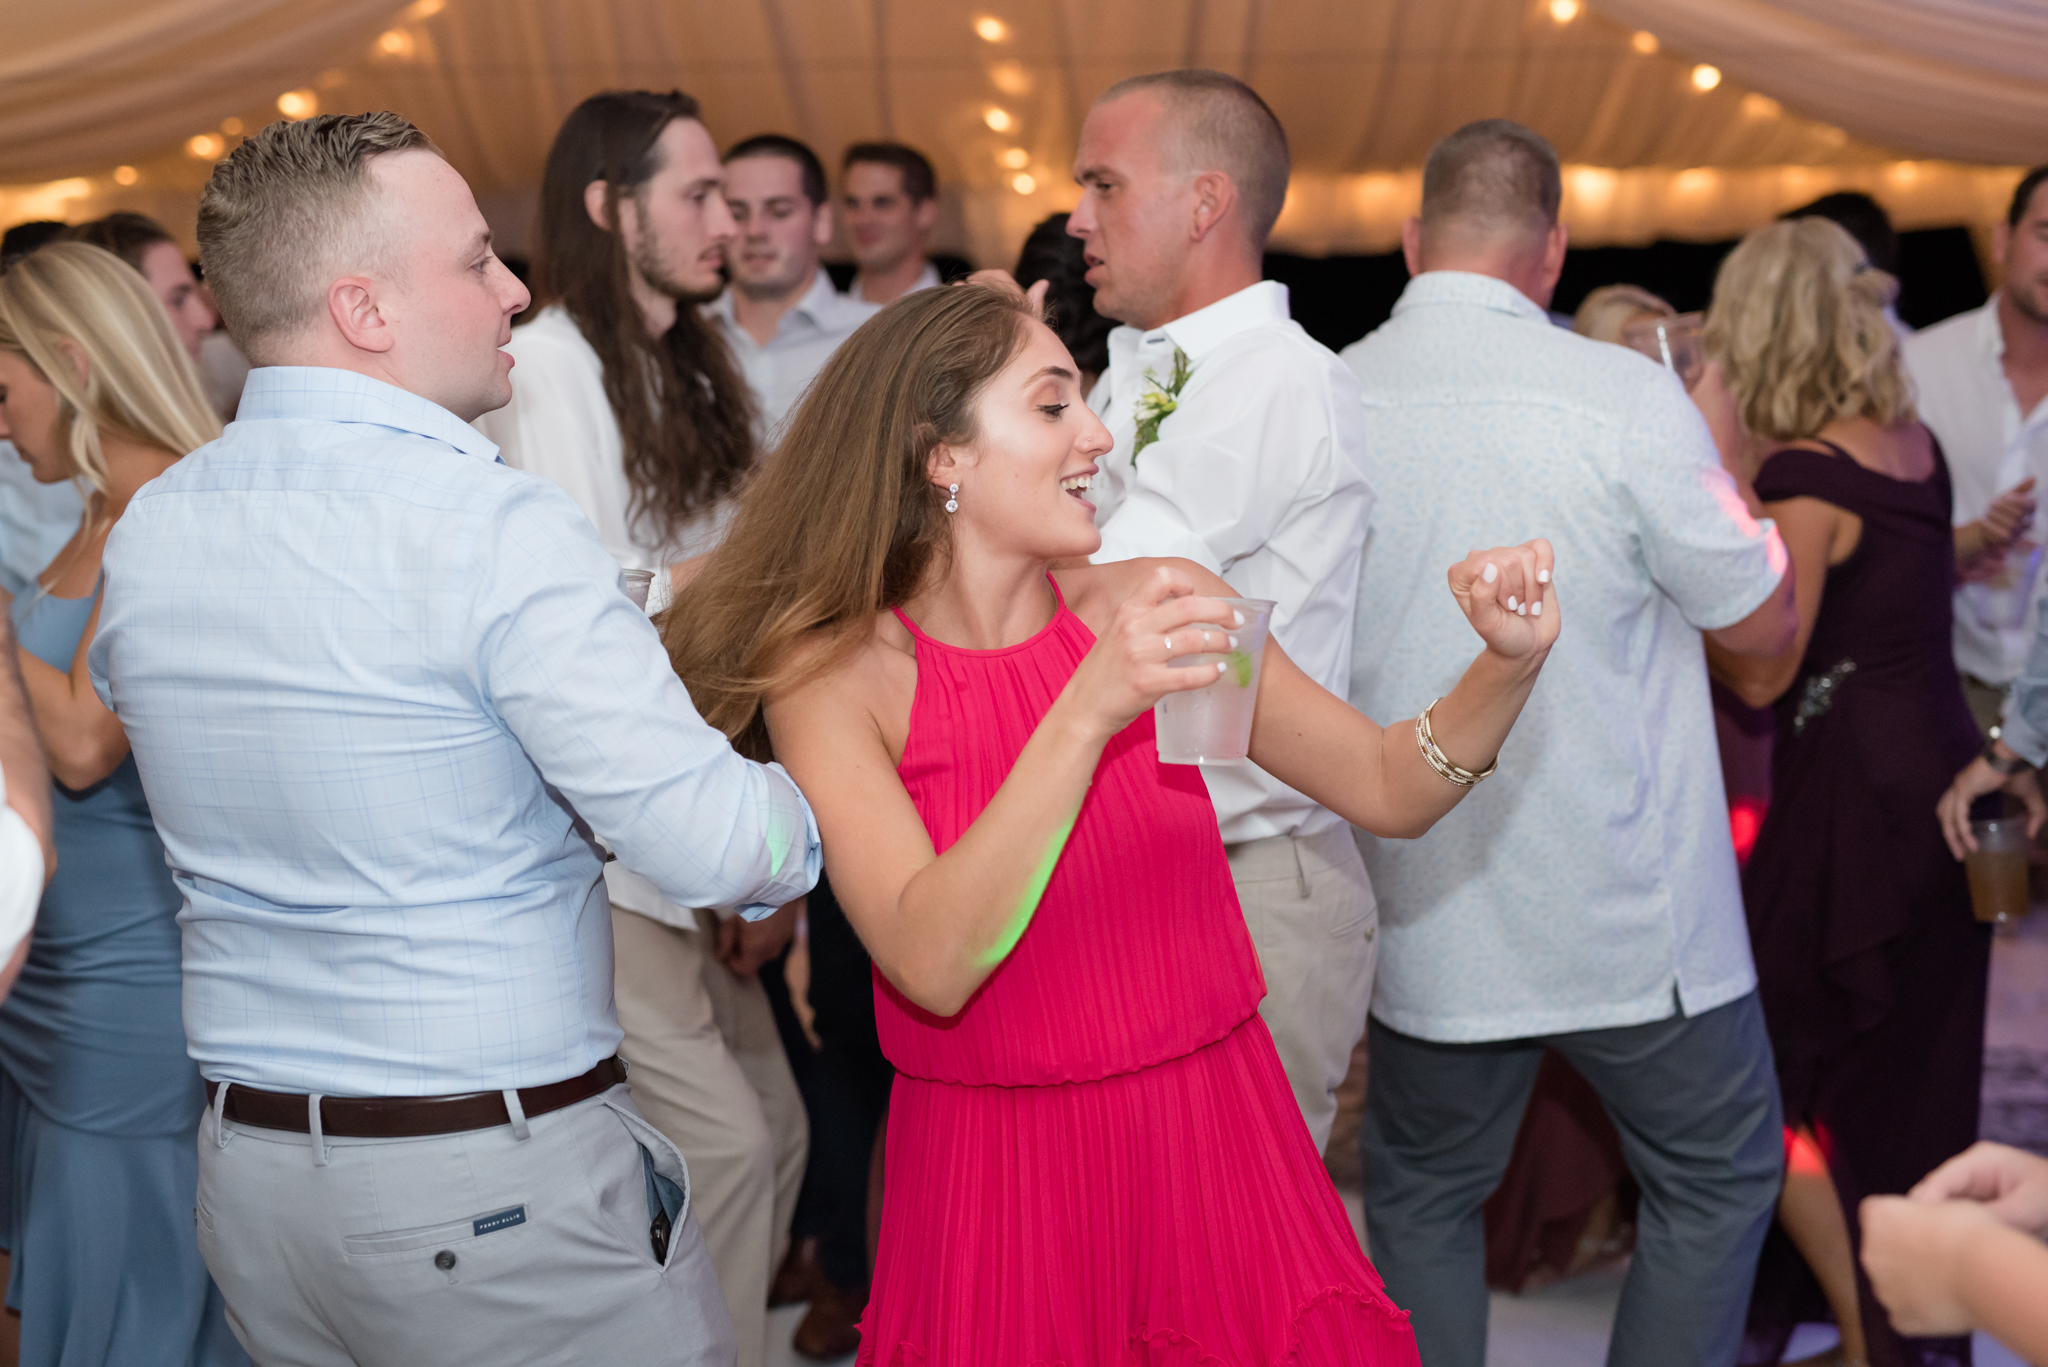 Guests dance at wedding reception.